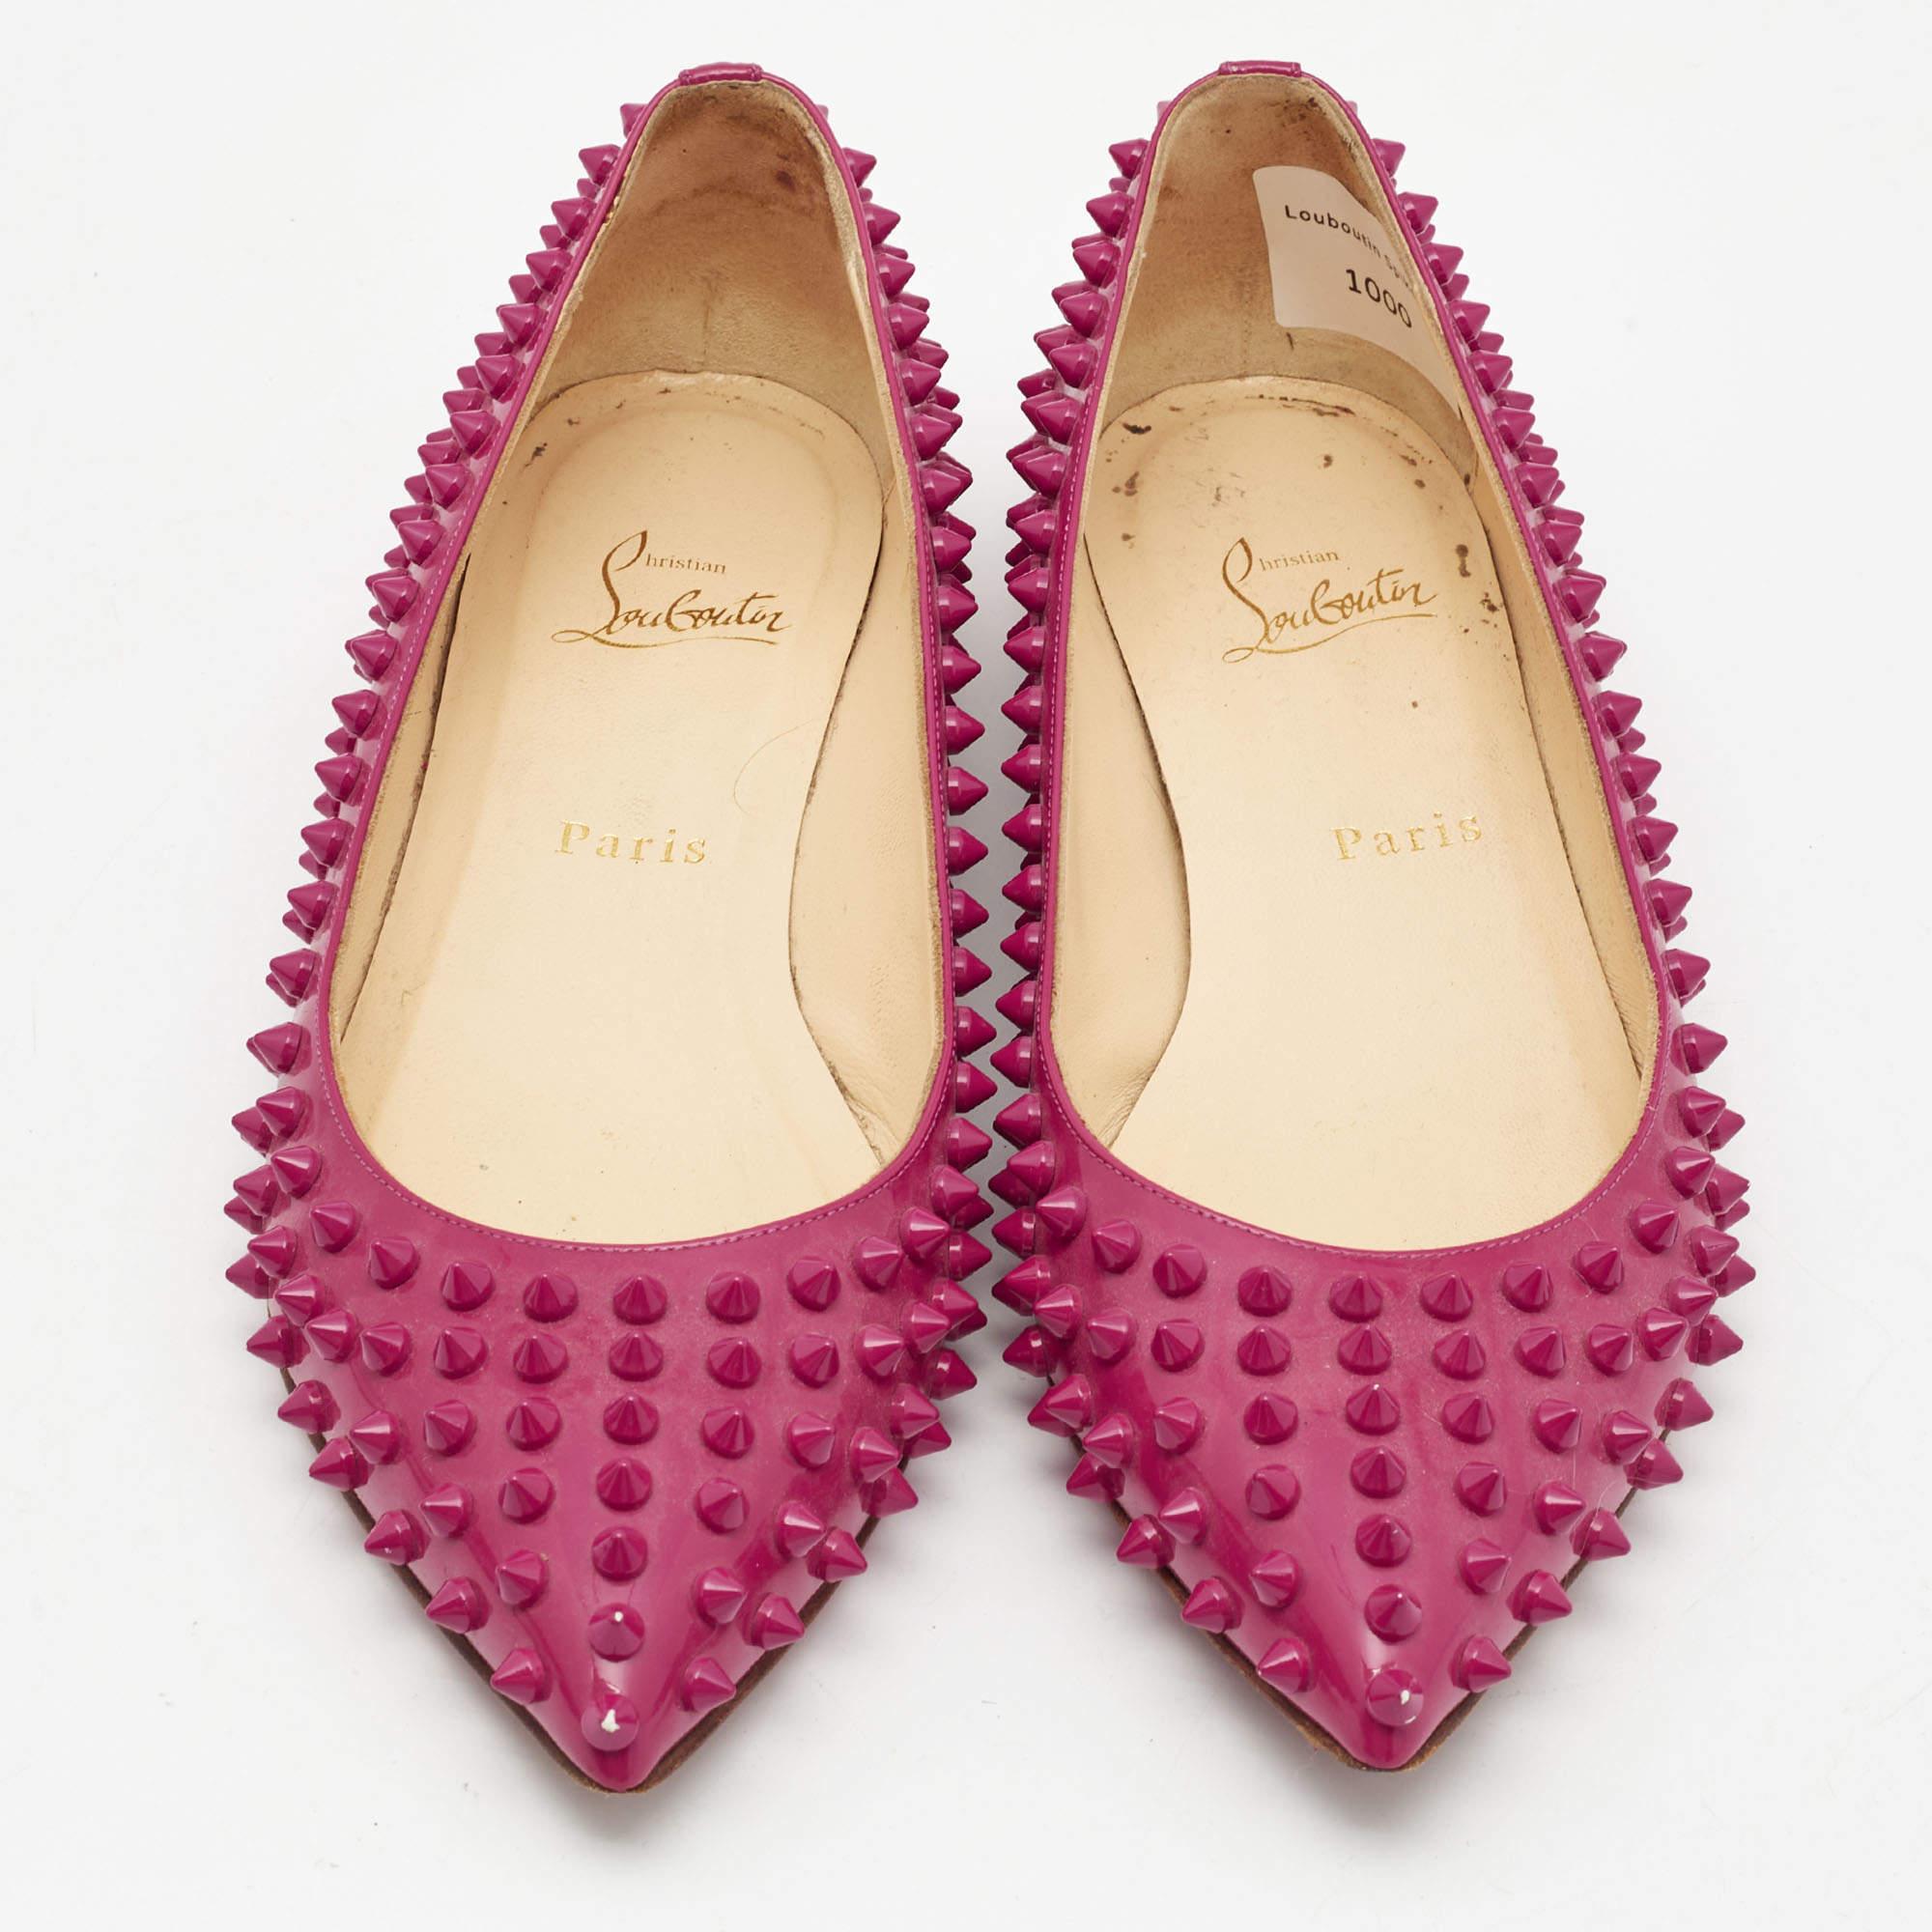 Complete your look by adding these Christian Louboutin spike ballet flats to your collection of everyday footwear. They are crafted skilfully to grant the perfect fit and style.

Includes: Original Dustbag

